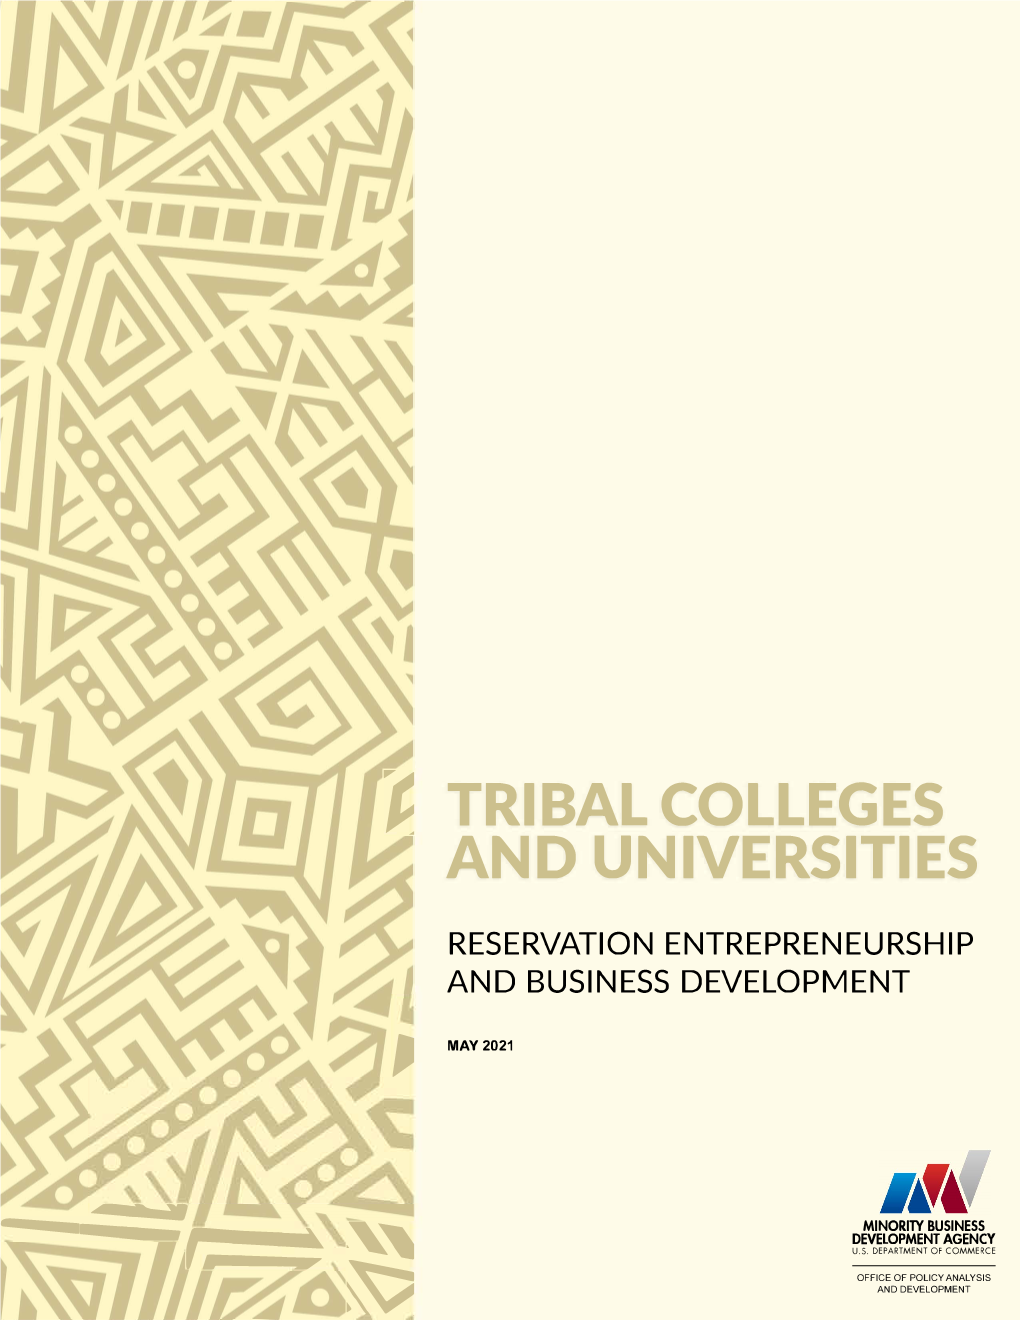 Tribal Colleges and Universities White Paper